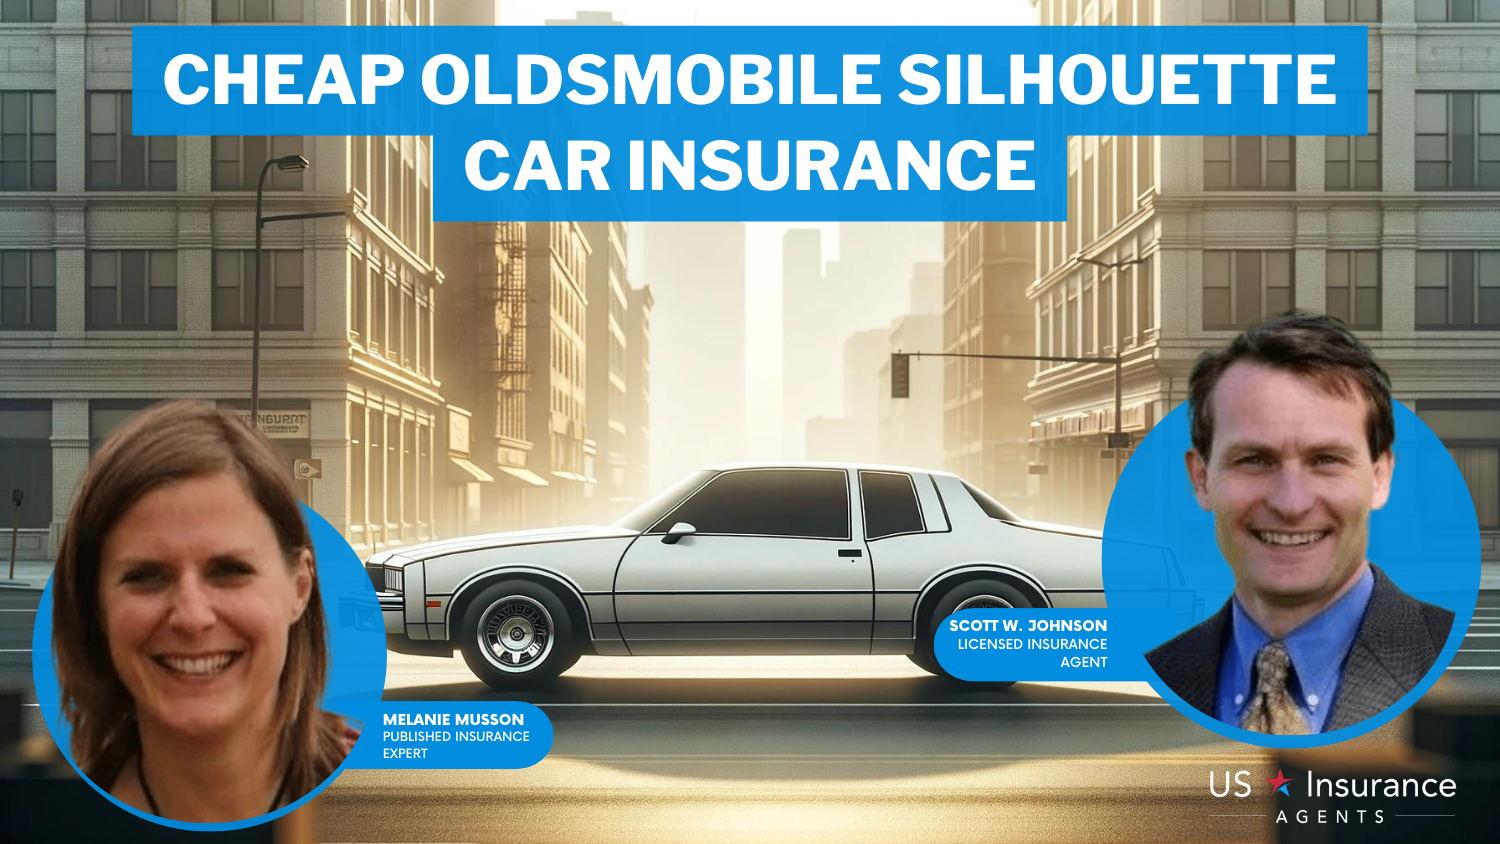 Cheap Oldsmobile Silhouette Car Insurance: Nationwide, Allstate, and USAA